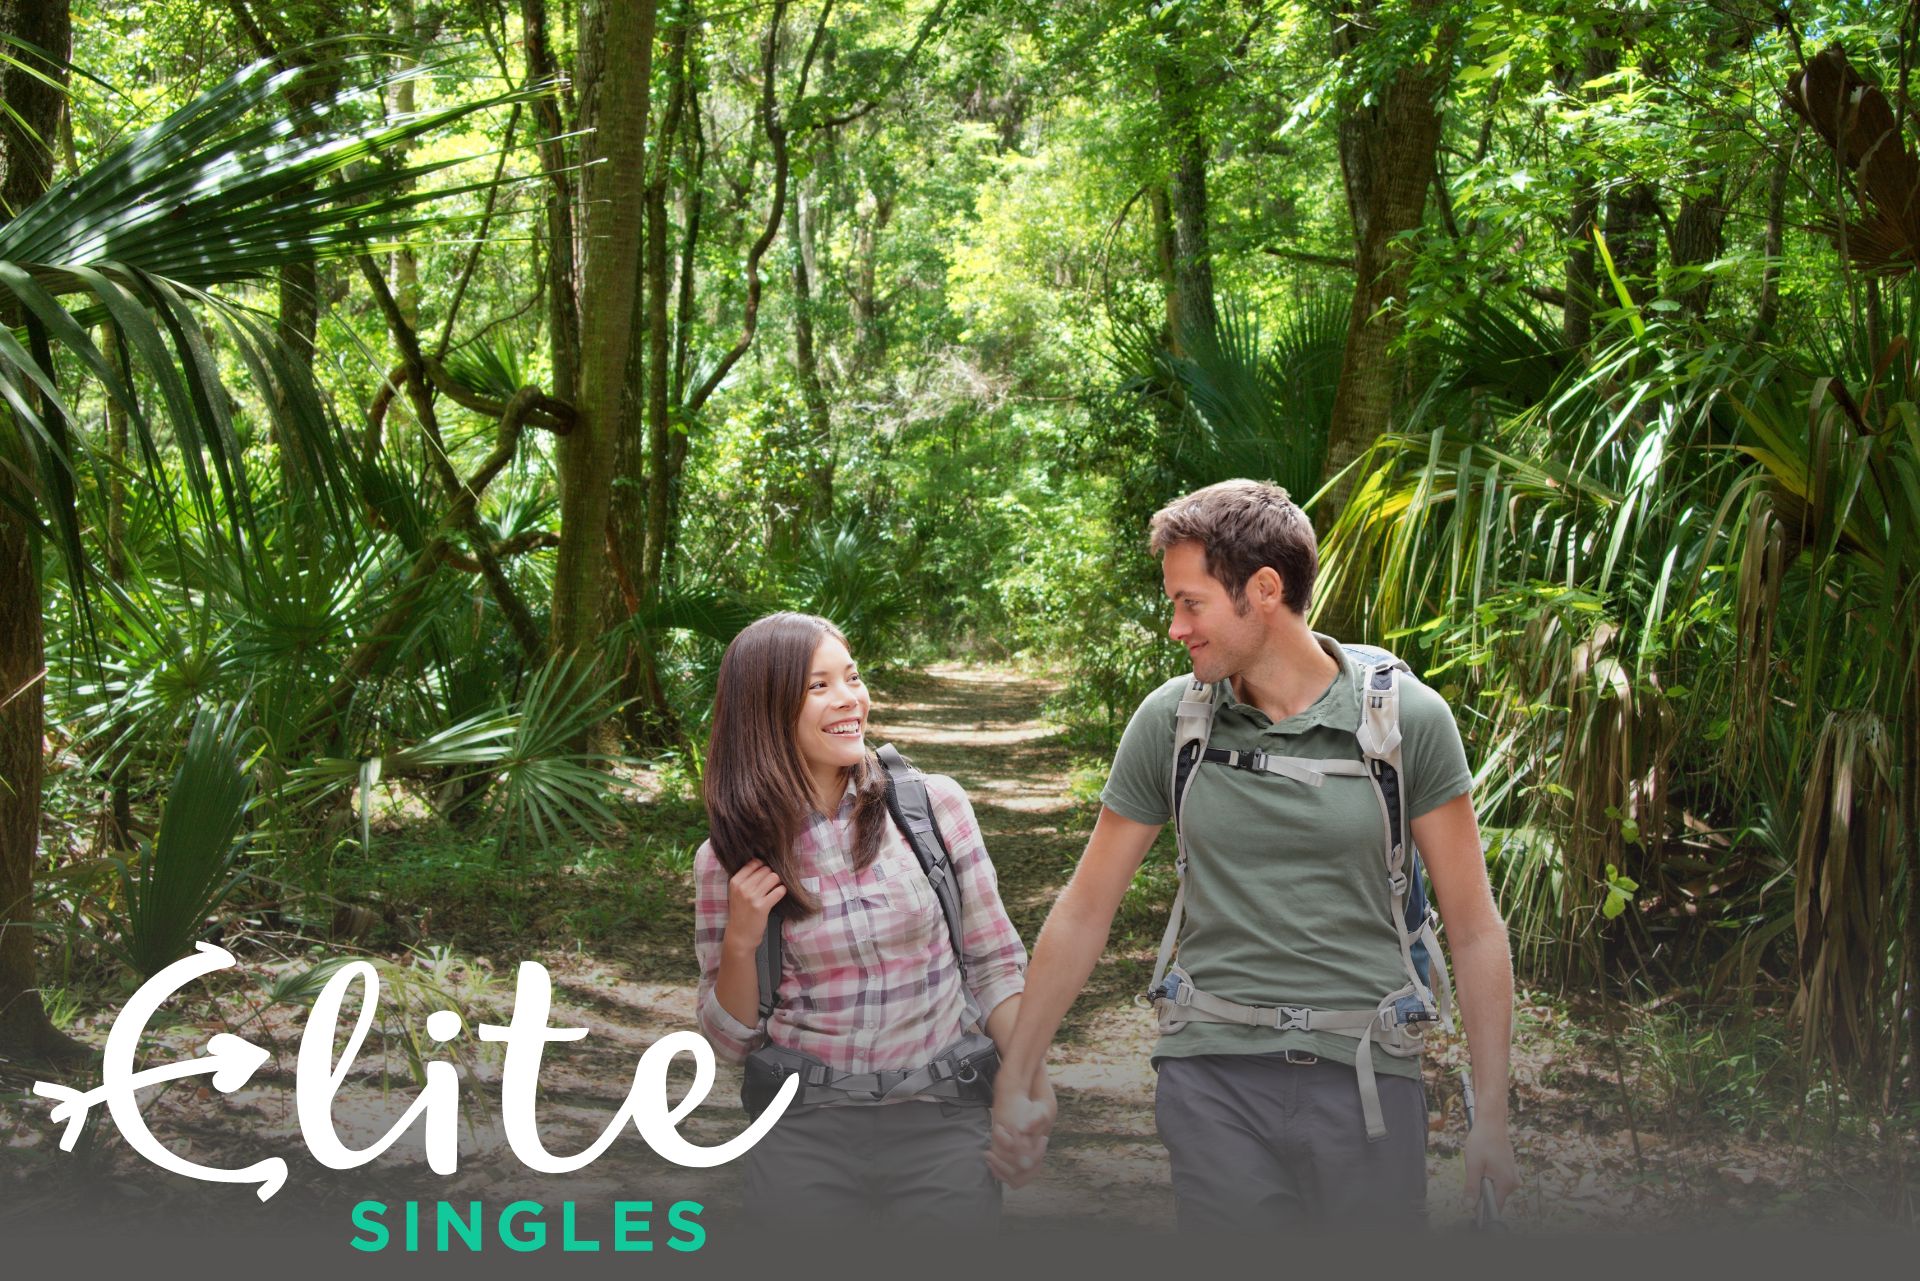 Dating in Florida - Couple on a walk in the everglades in Florida